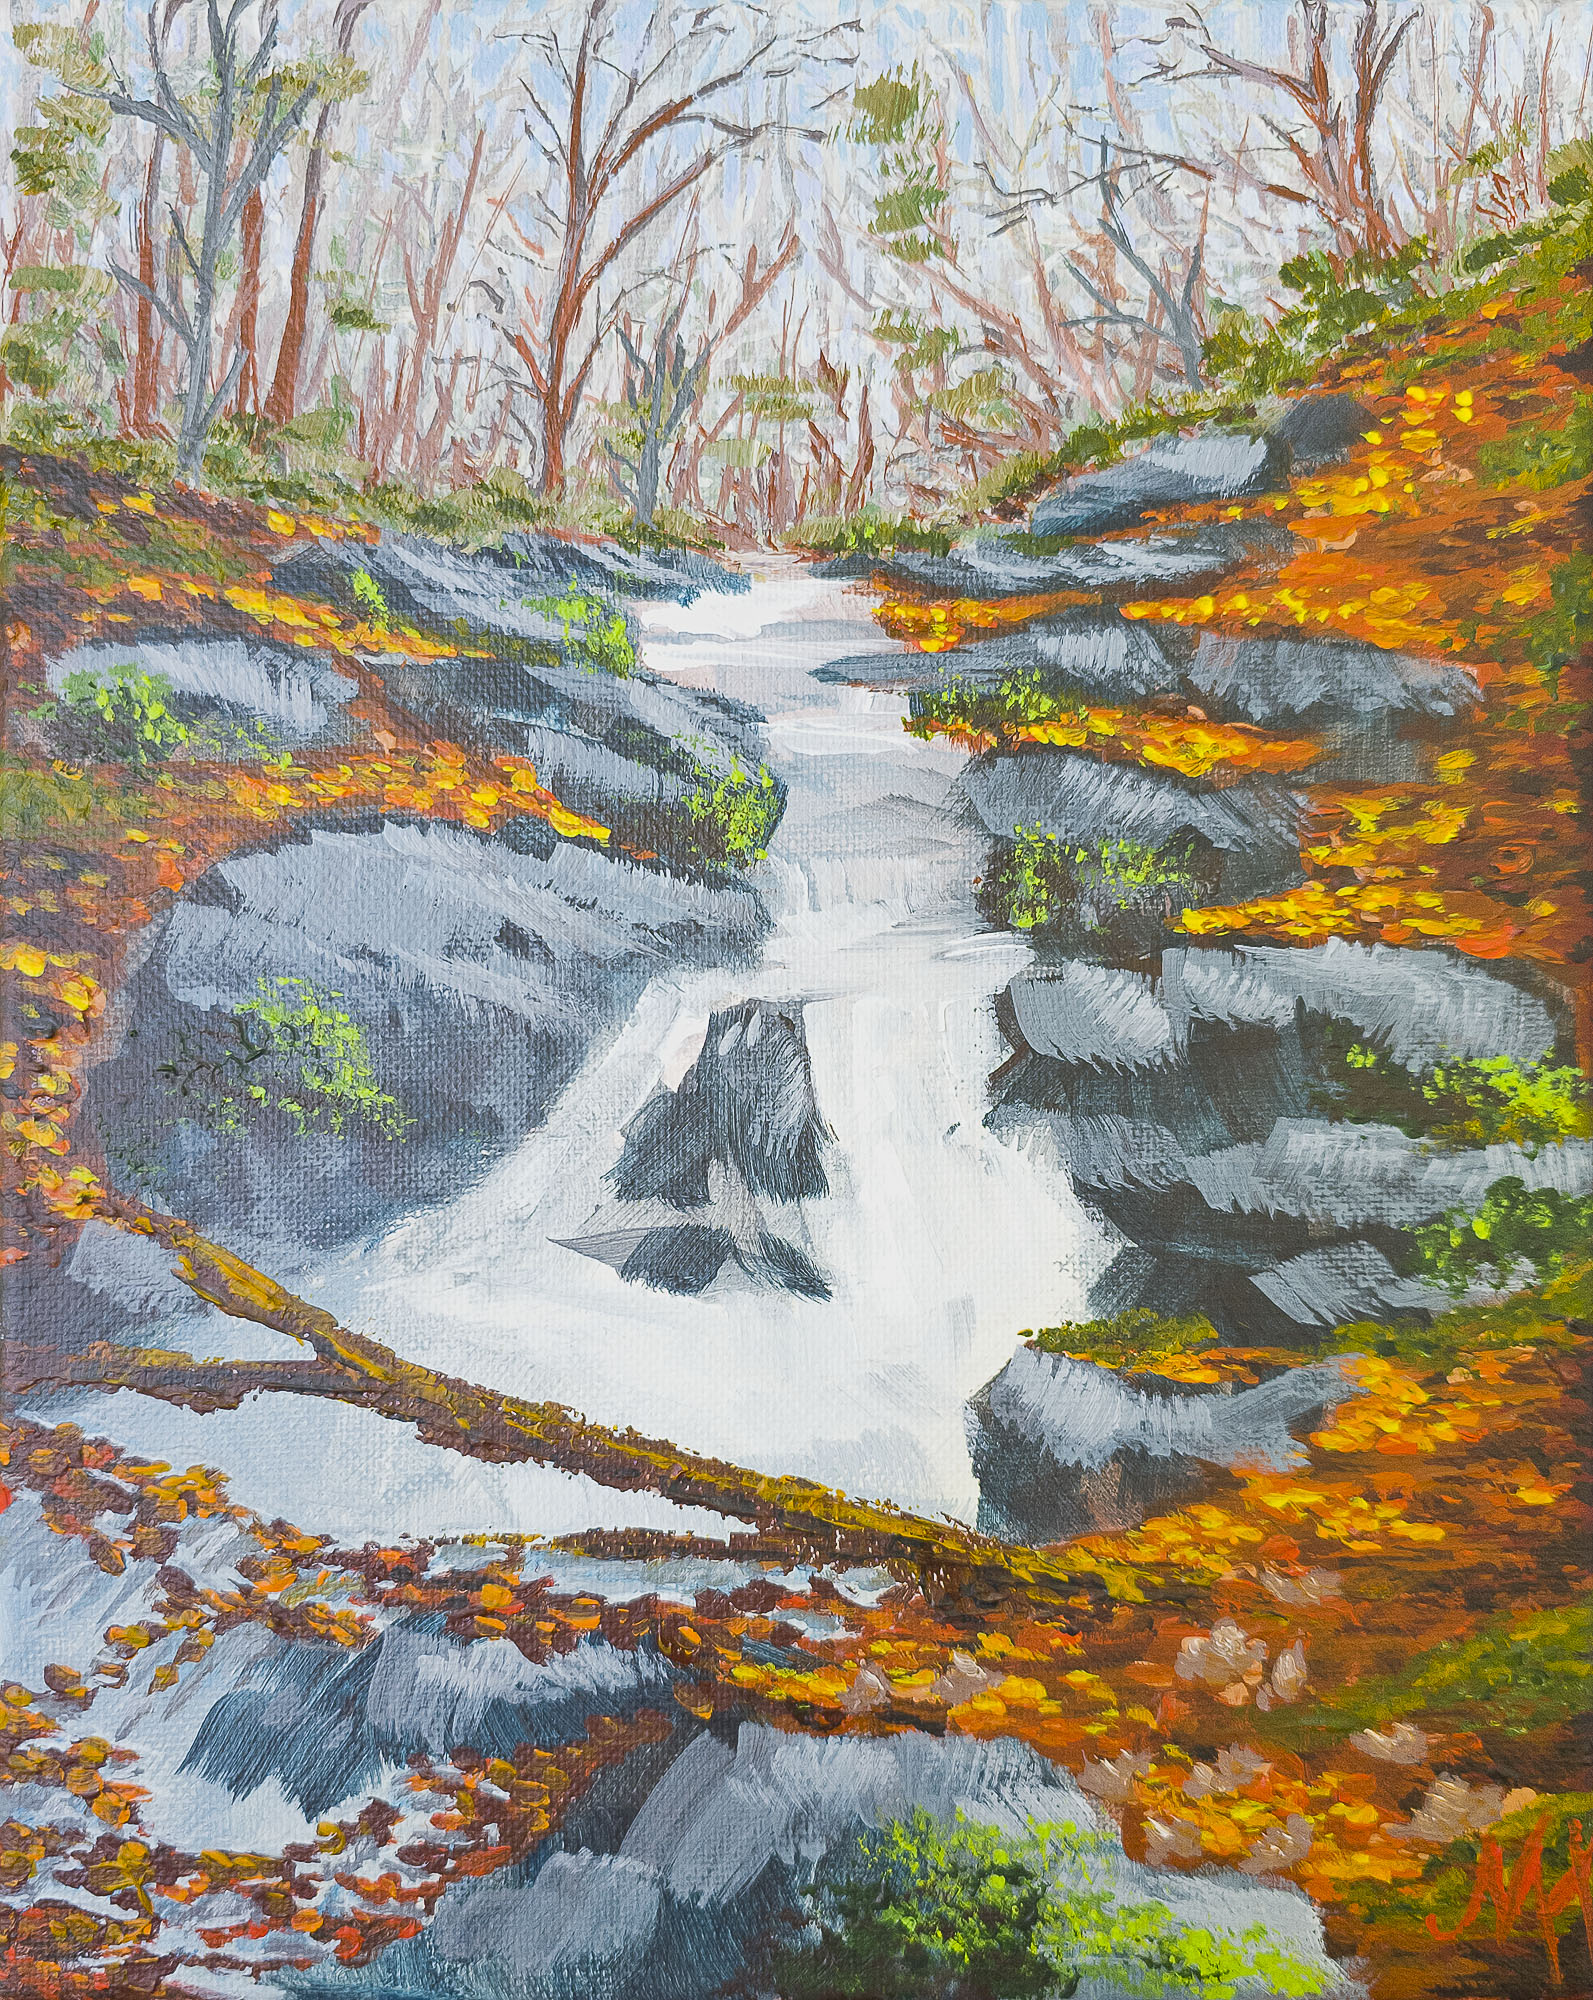 2307_01-A_Waterfall and Leaves. 8x10 acrylic on canvas